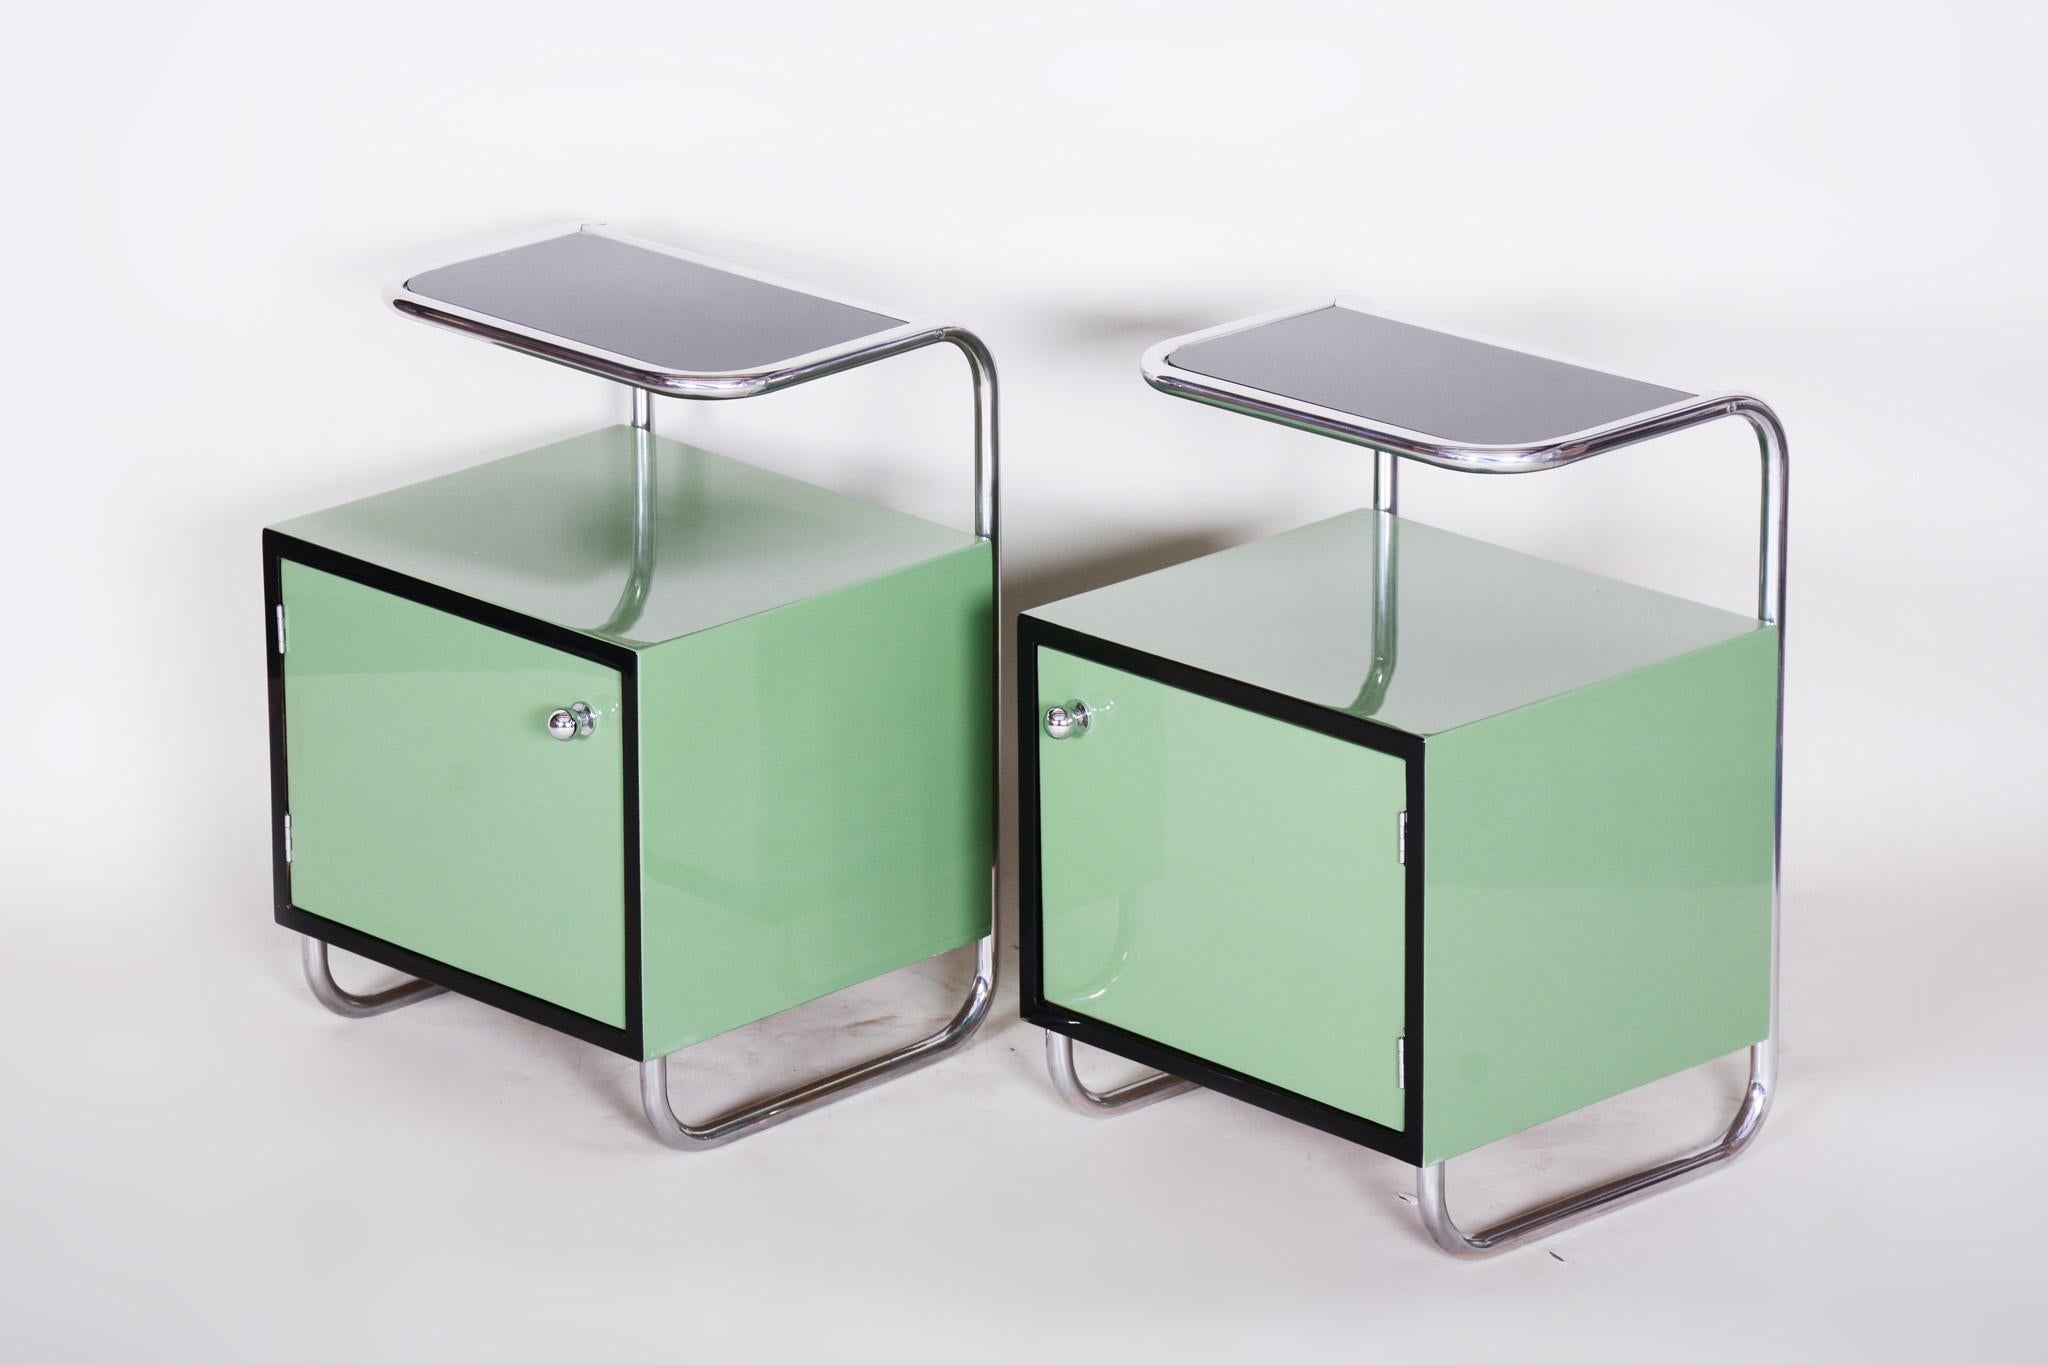 Pair of Green Vintage Bauhaus Bed Side Tables, Vichr, 1930s Glass Removable Desk 2